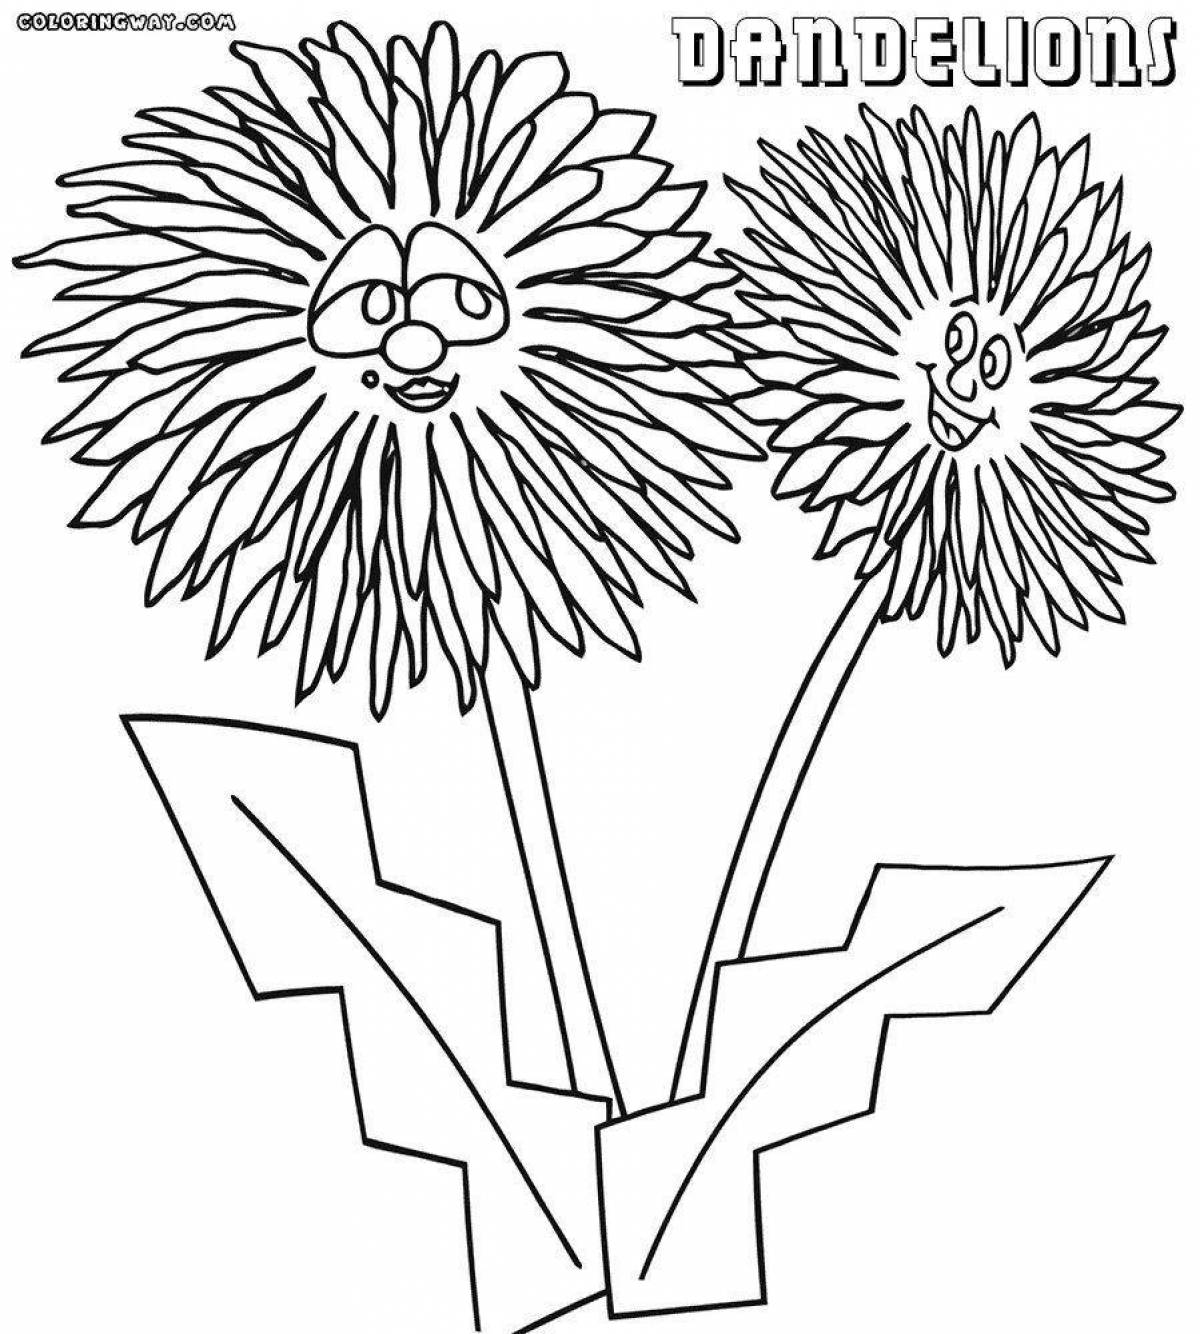 Great dandelion coloring book for kids